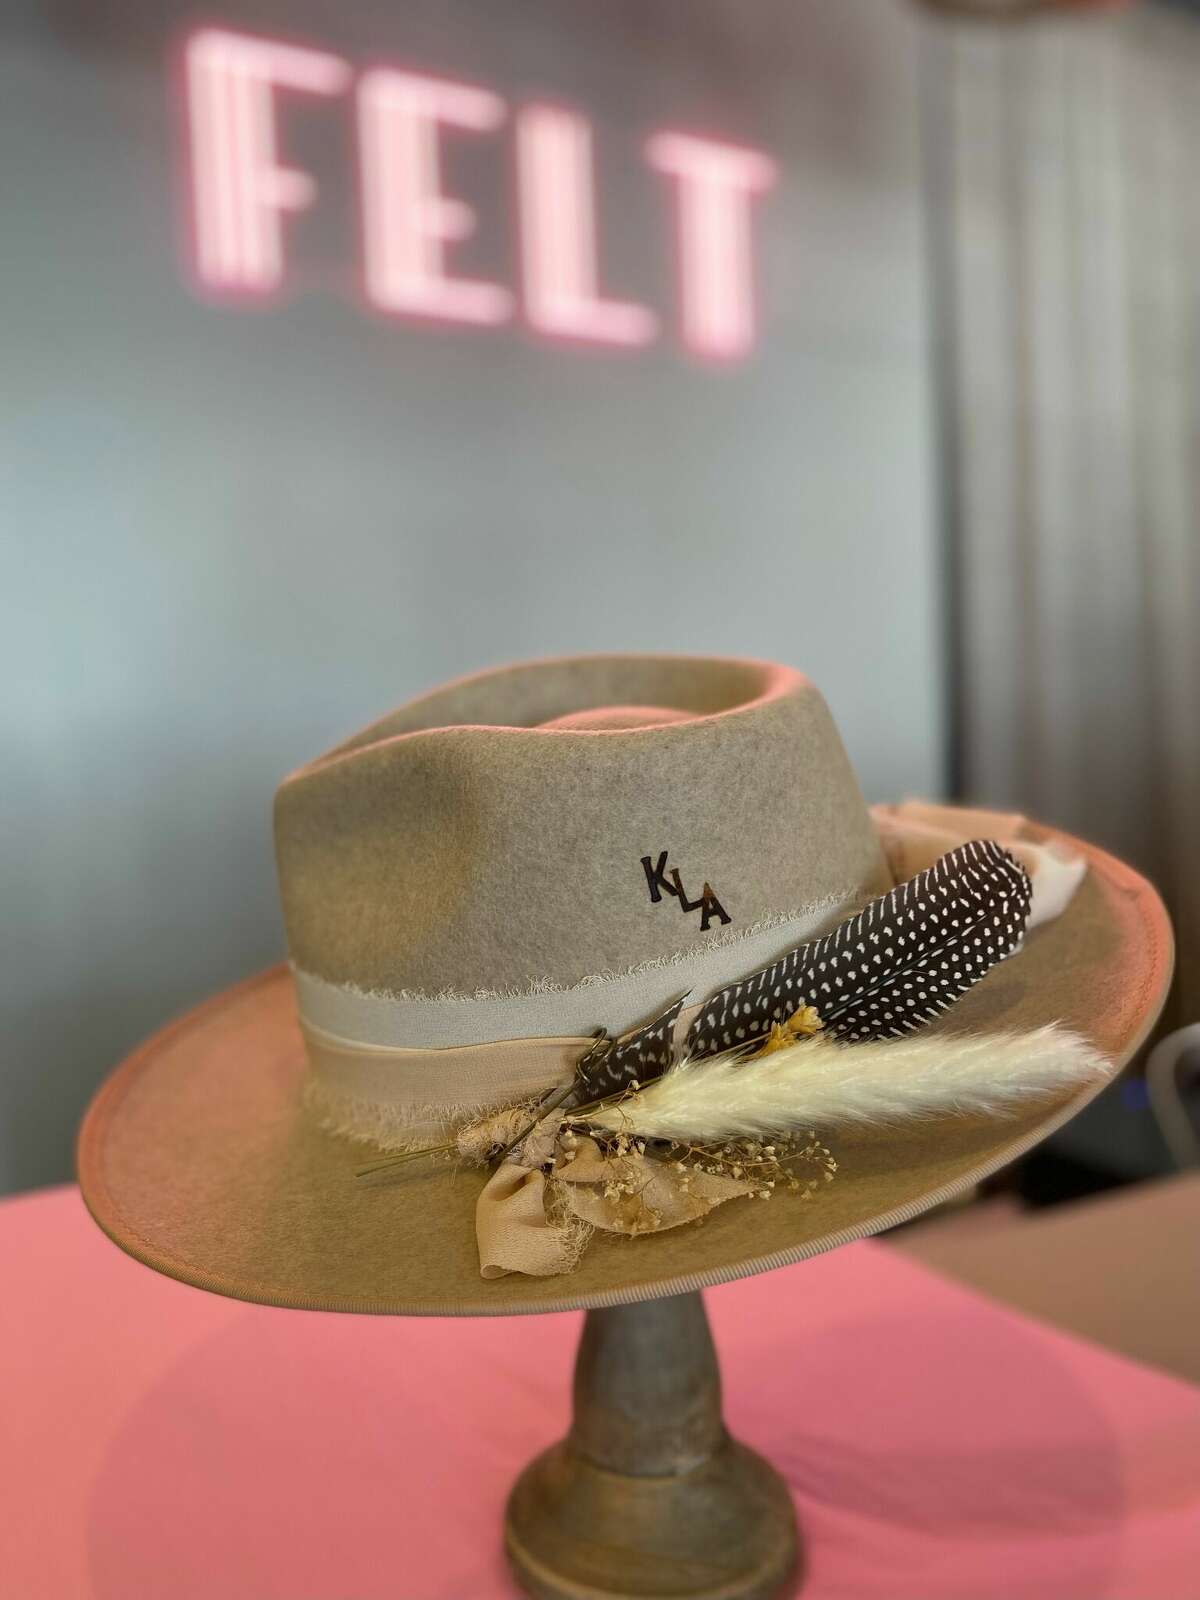 Felt Boutique is a new women's apparel and hat store in Fredericksburg.